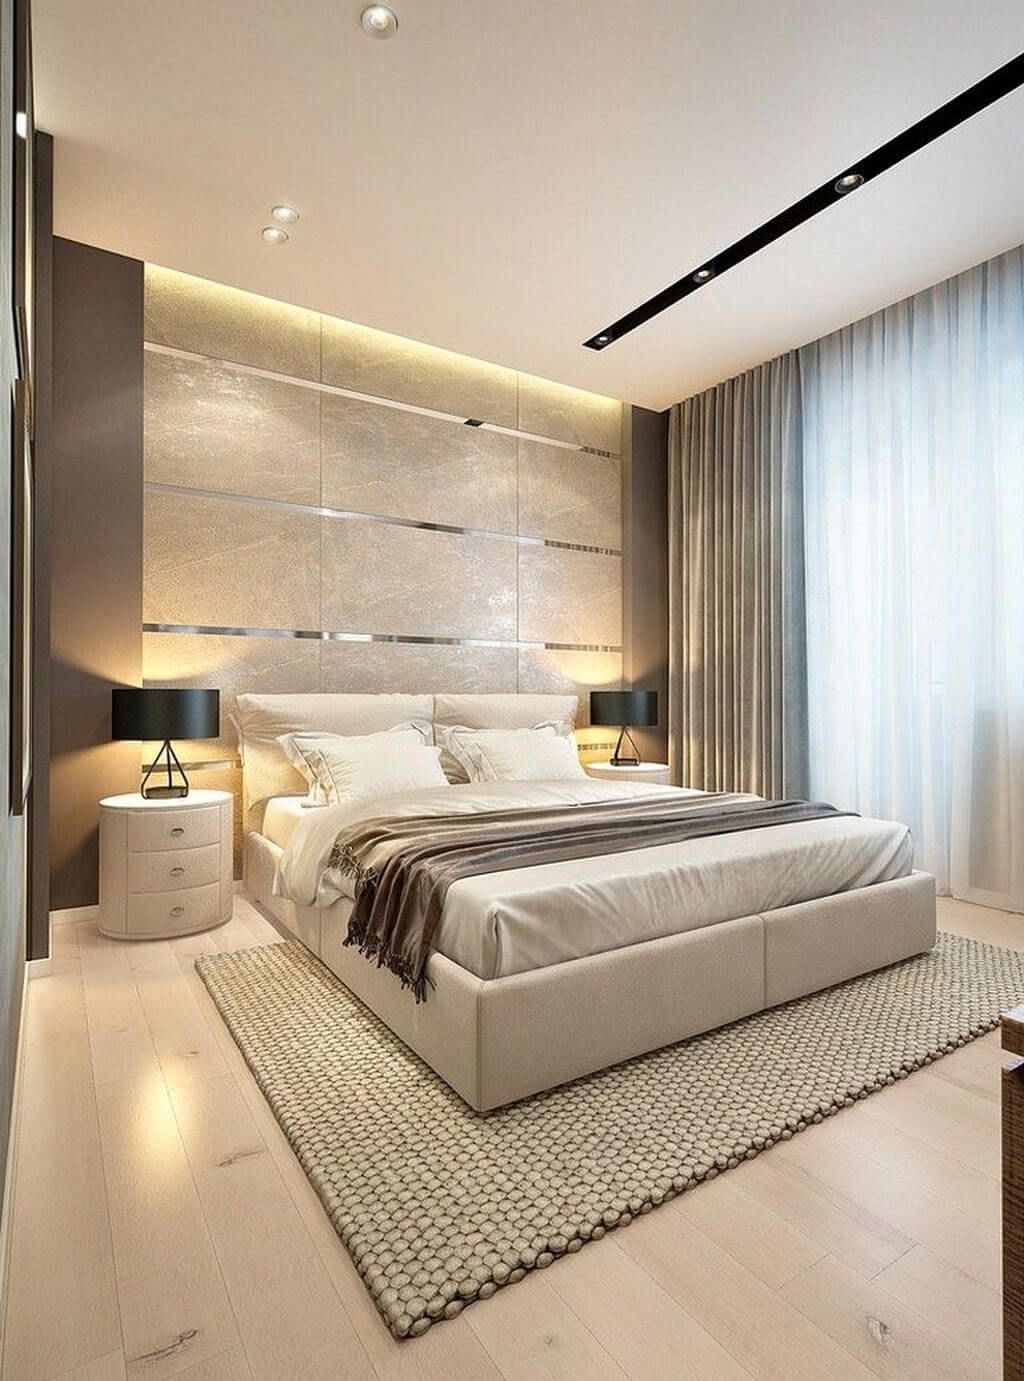 Incredible Modern Bedroom Design Ideas To Get Inspired - My Home My Zone